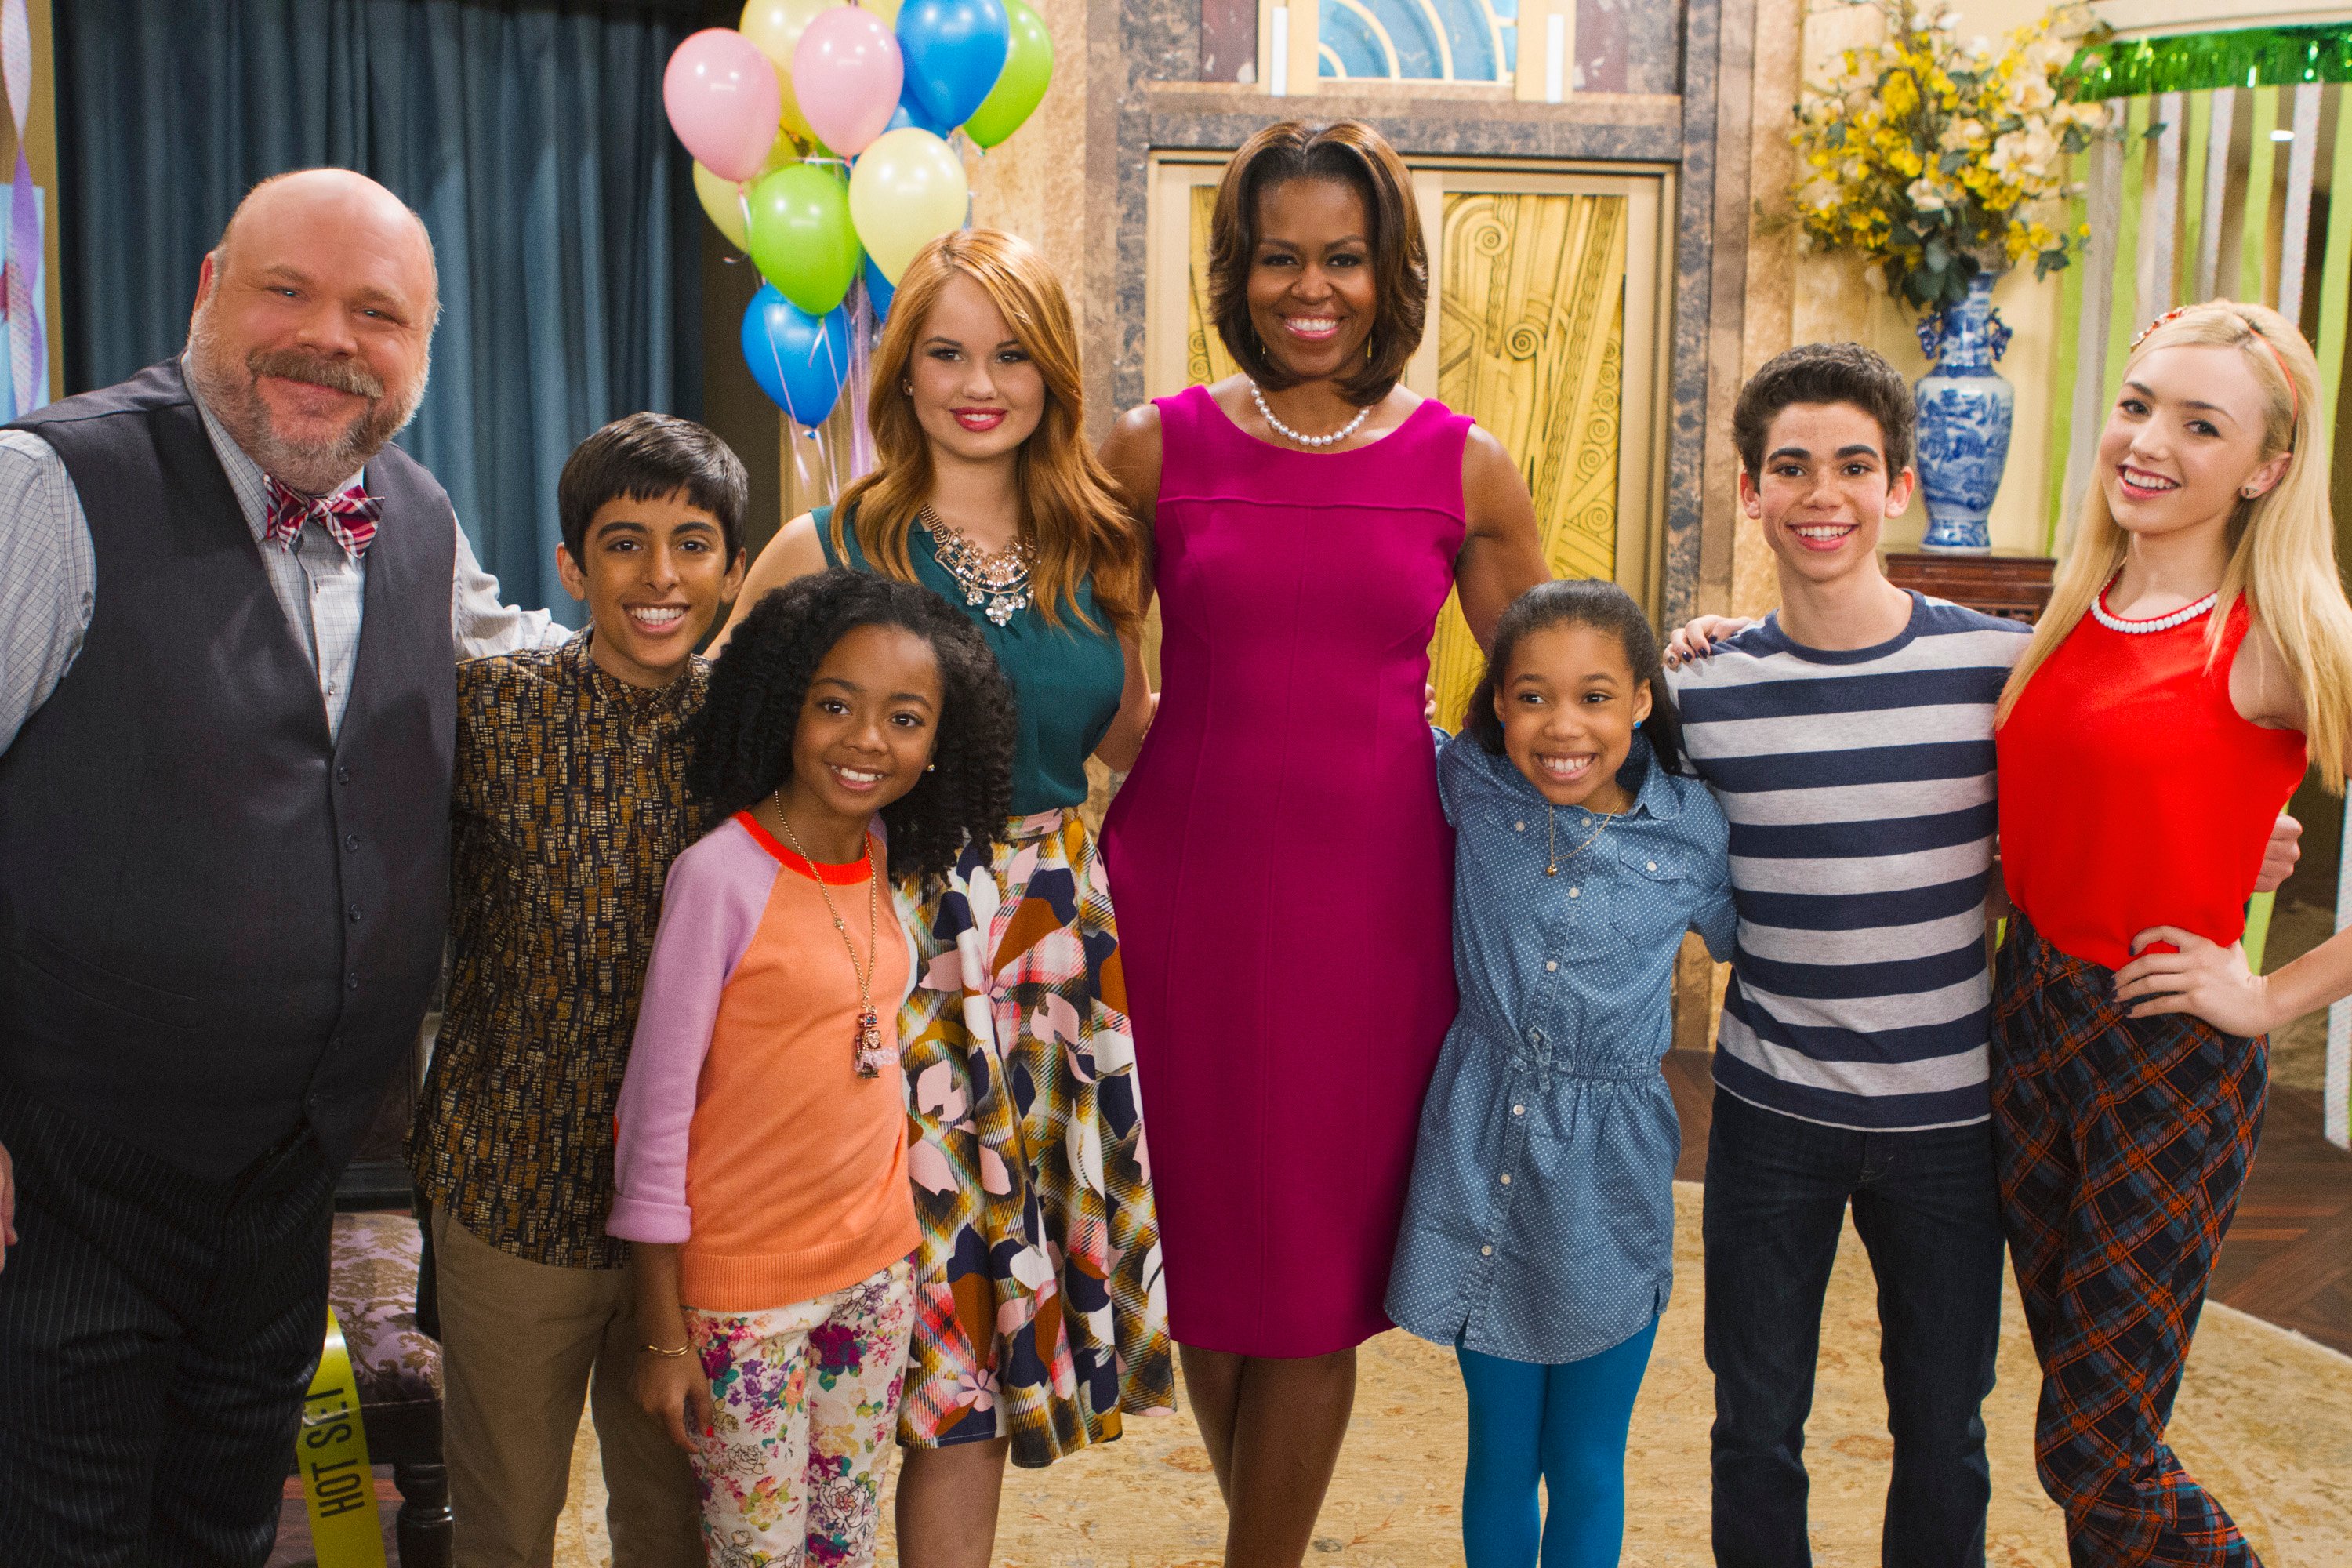 Former First Lady Michelle Obama in Disney Channel's 'Jessie' episode titled 'From the White House to our House'